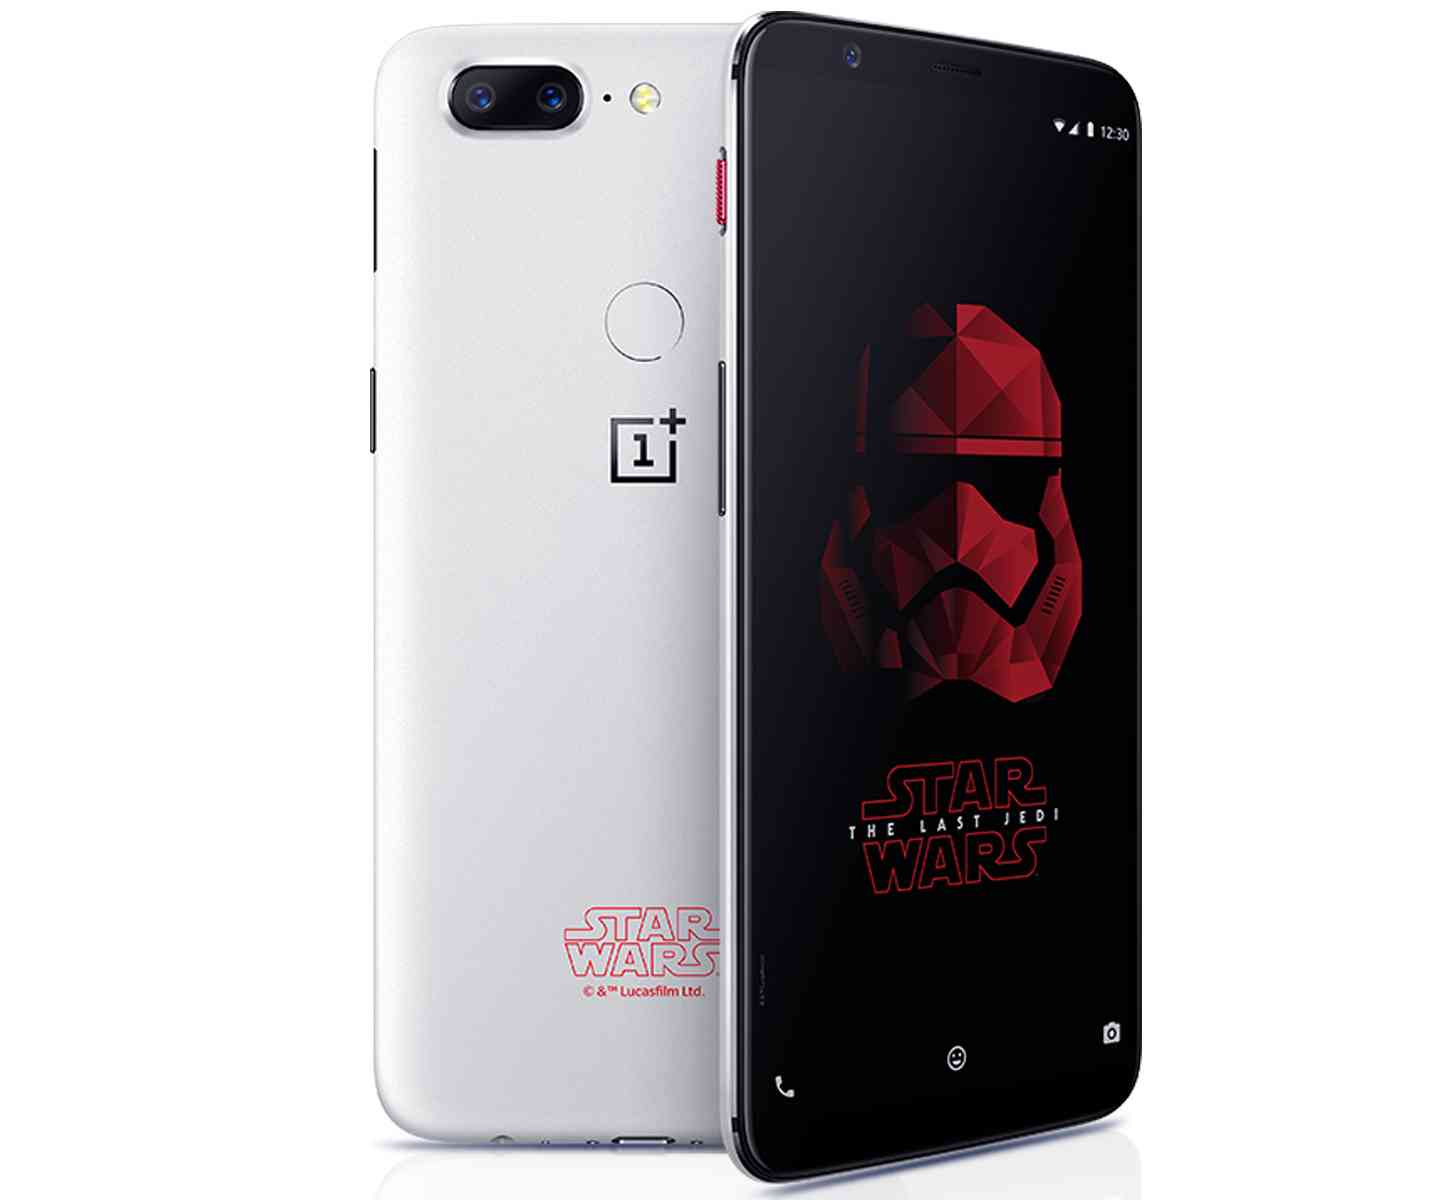 OnePlus 5T Star Wars Limited Edition model official images